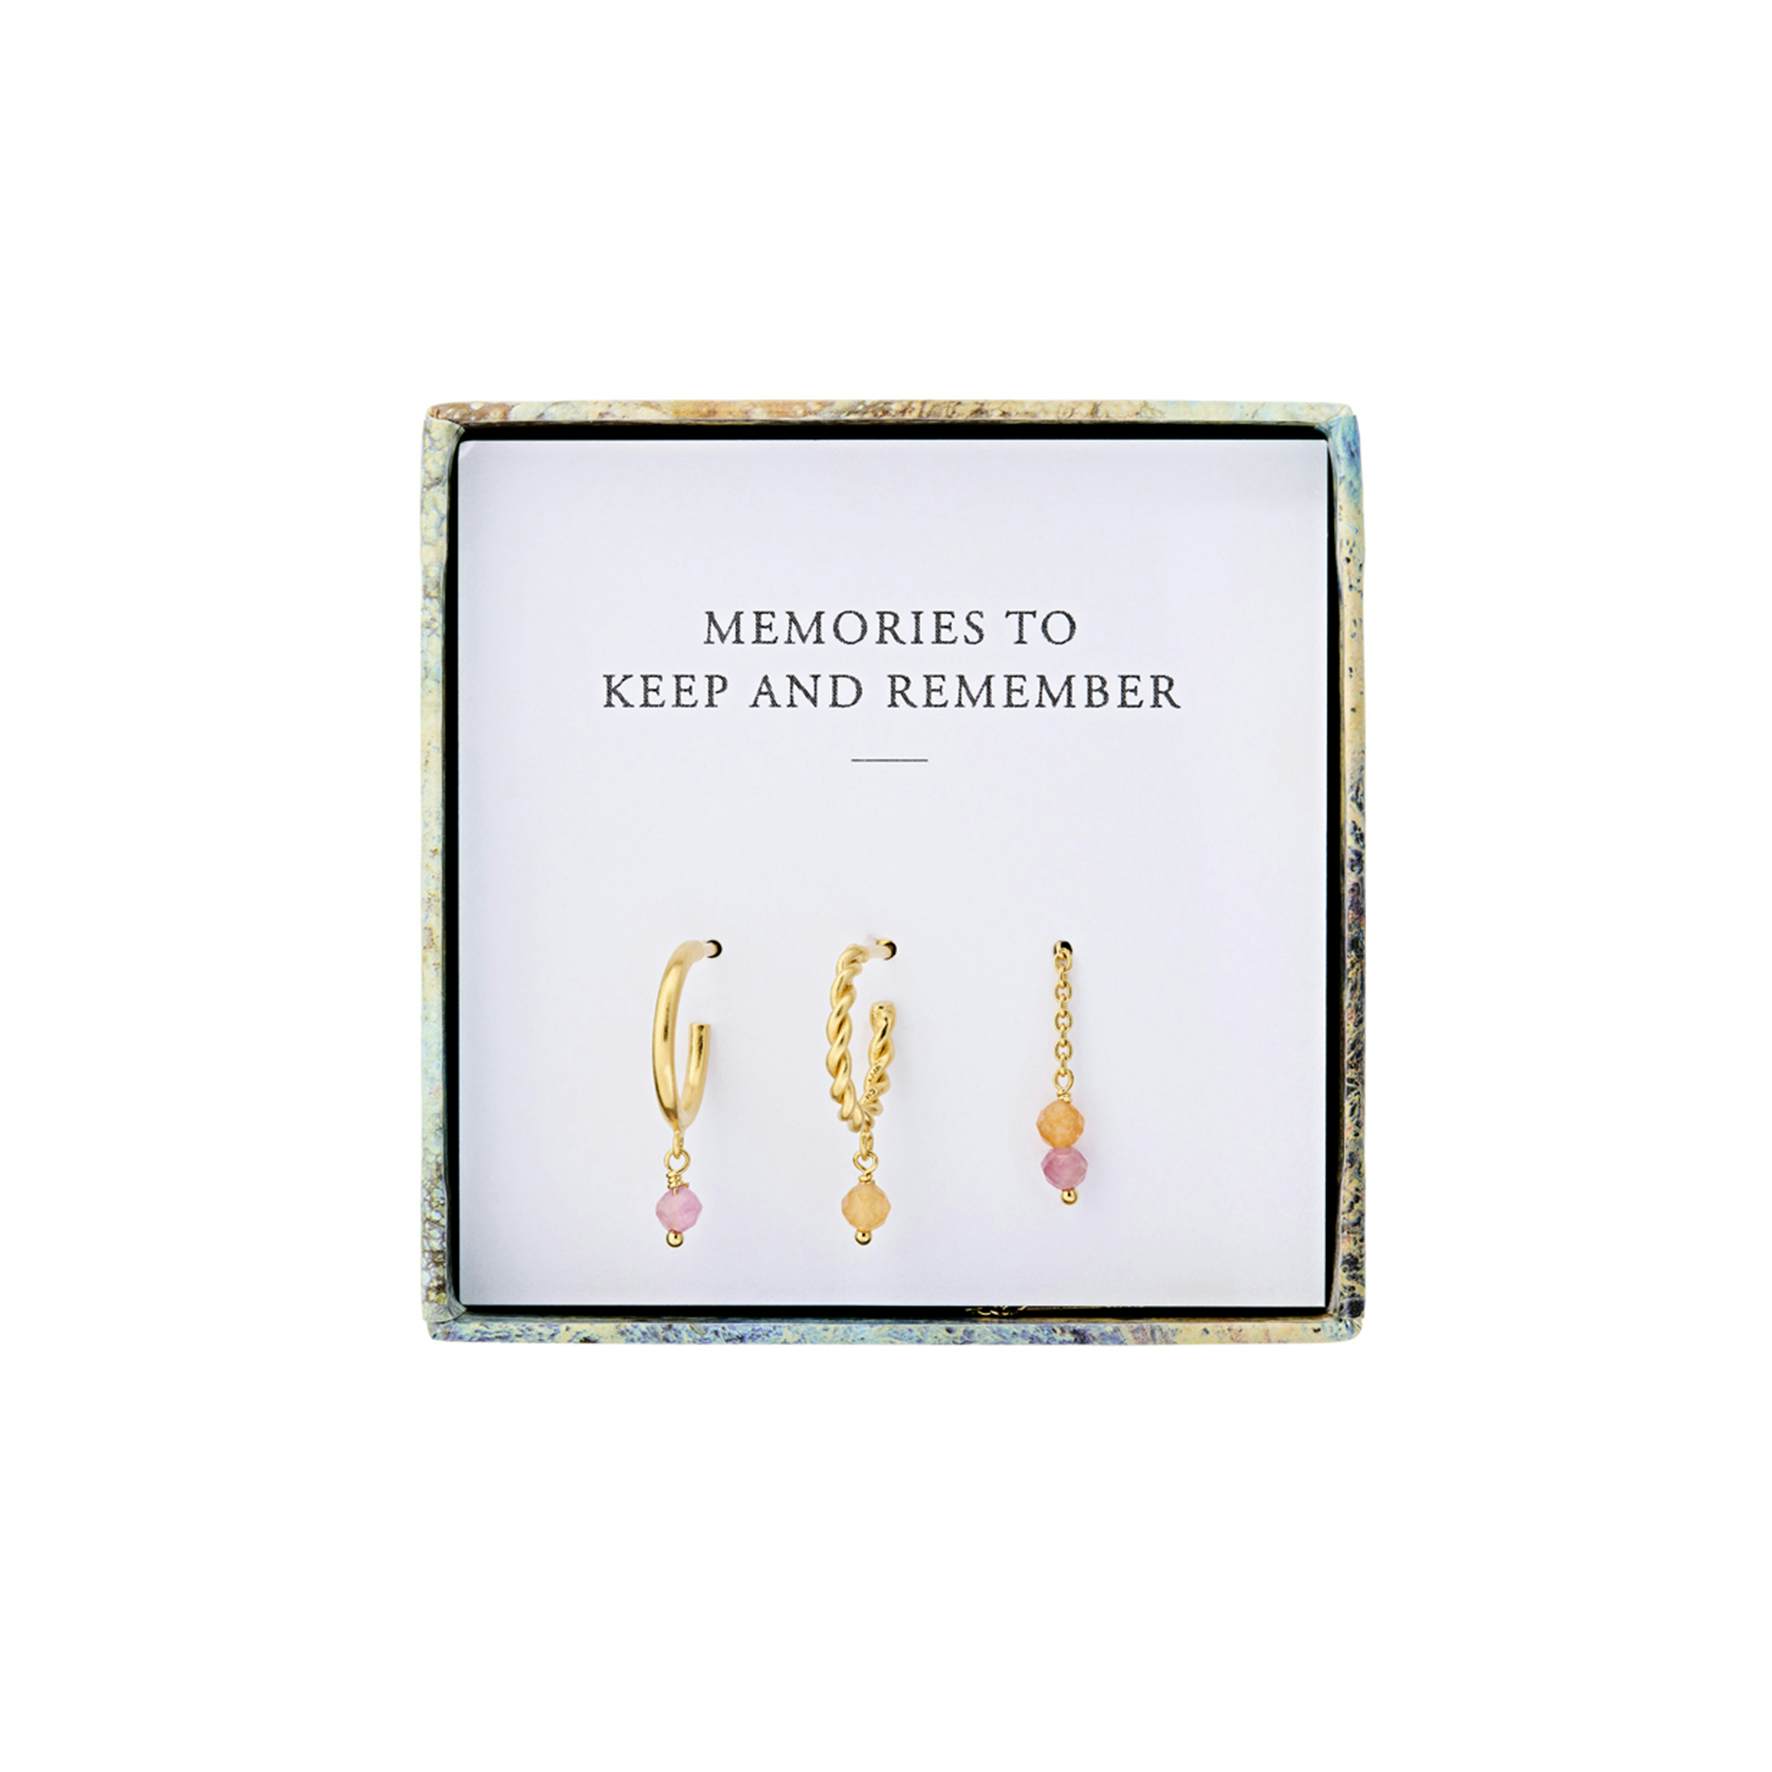 Bloom Earring Box from Pernille Corydon in Goldplated-Silver Sterling 925